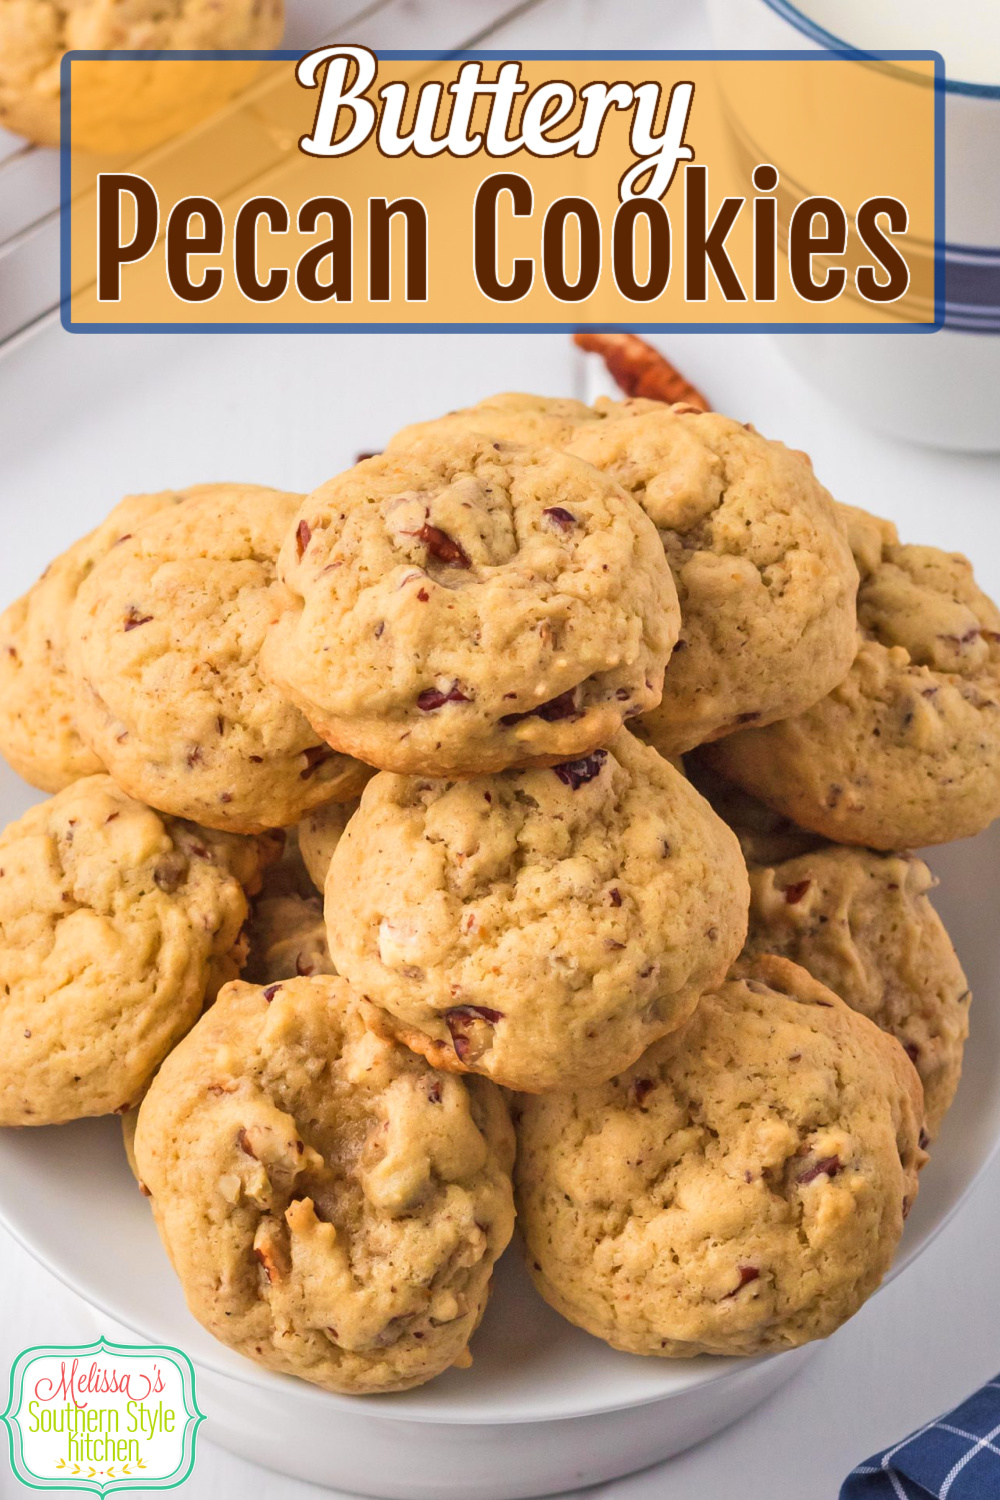 These buttery Pecan Cookies are a stellar dessert option for the holidays, game day, tea parties or any occasion #butterpecancookies #cookierecipes #cookies #butterpecanrecipes #southernpecans #southerncookierecipes #cookierecipes #pecancookies #christmascookies via @melissasssk